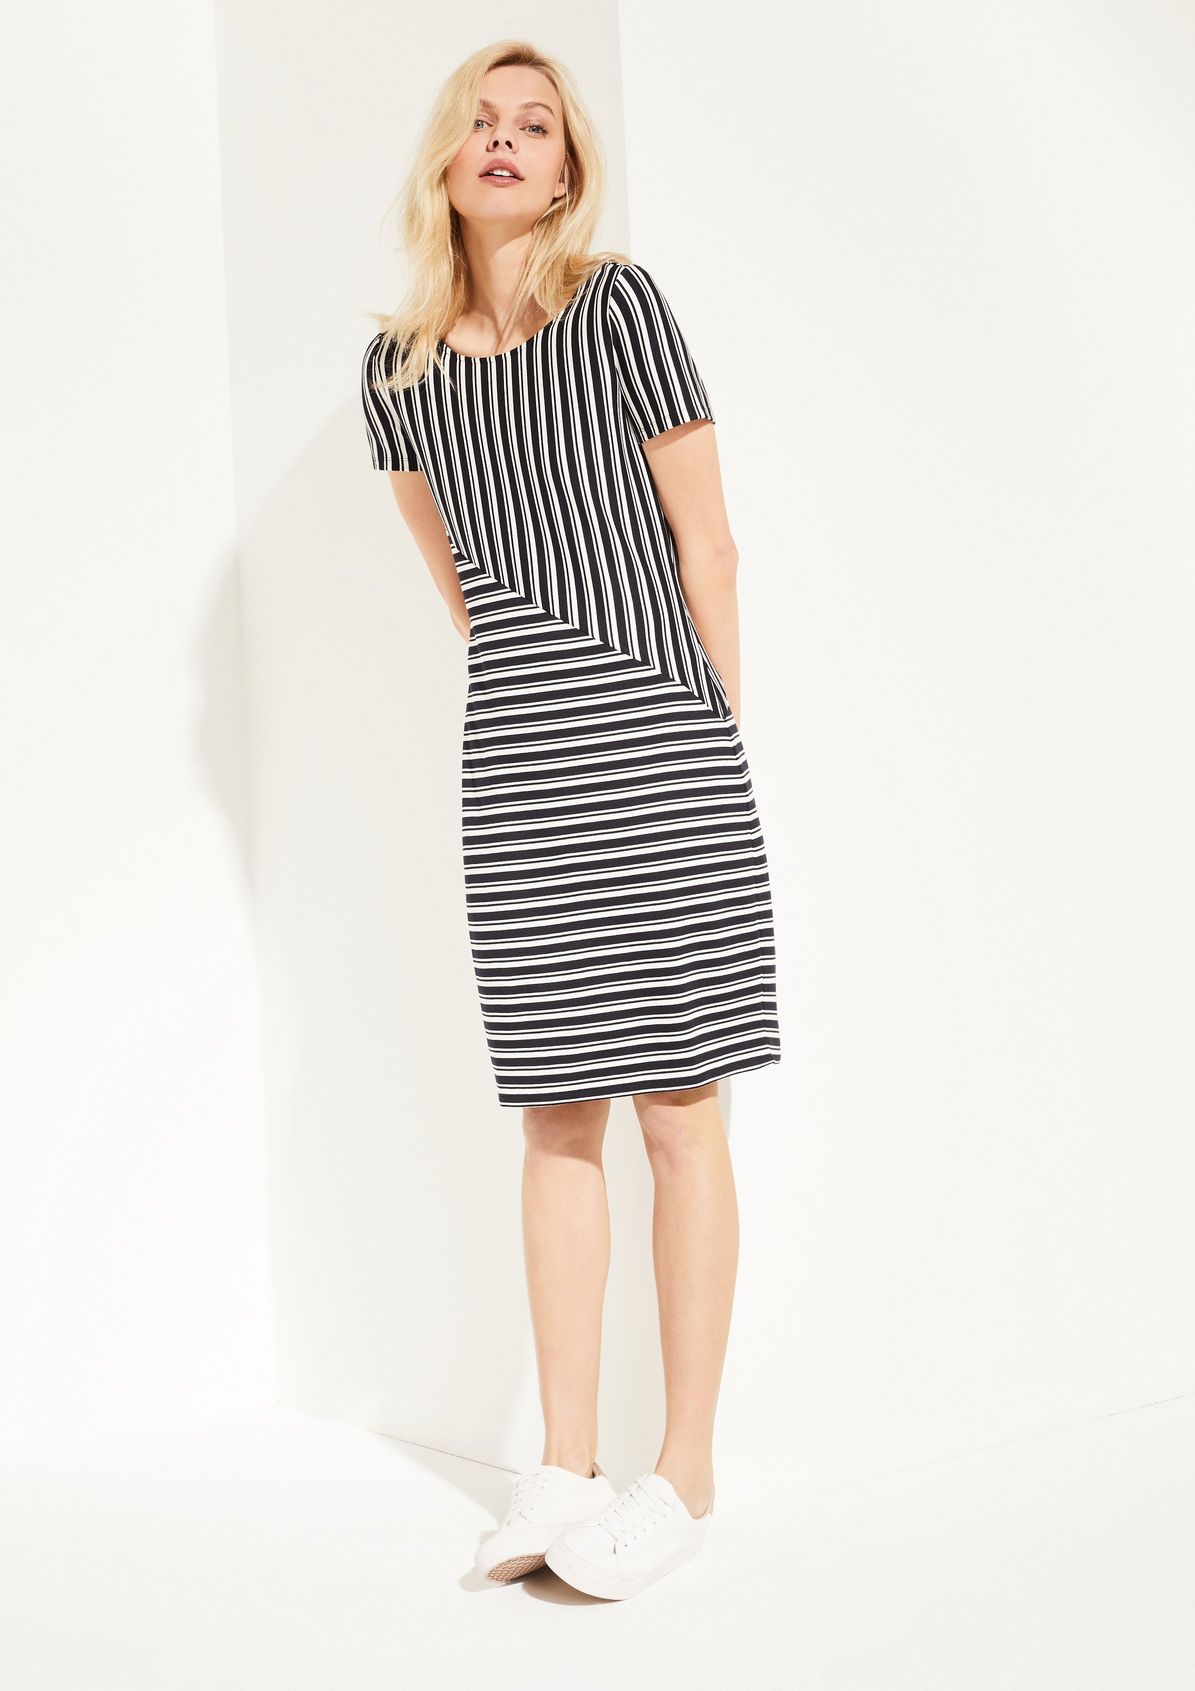 Jersey dress with a striped pattern from comma